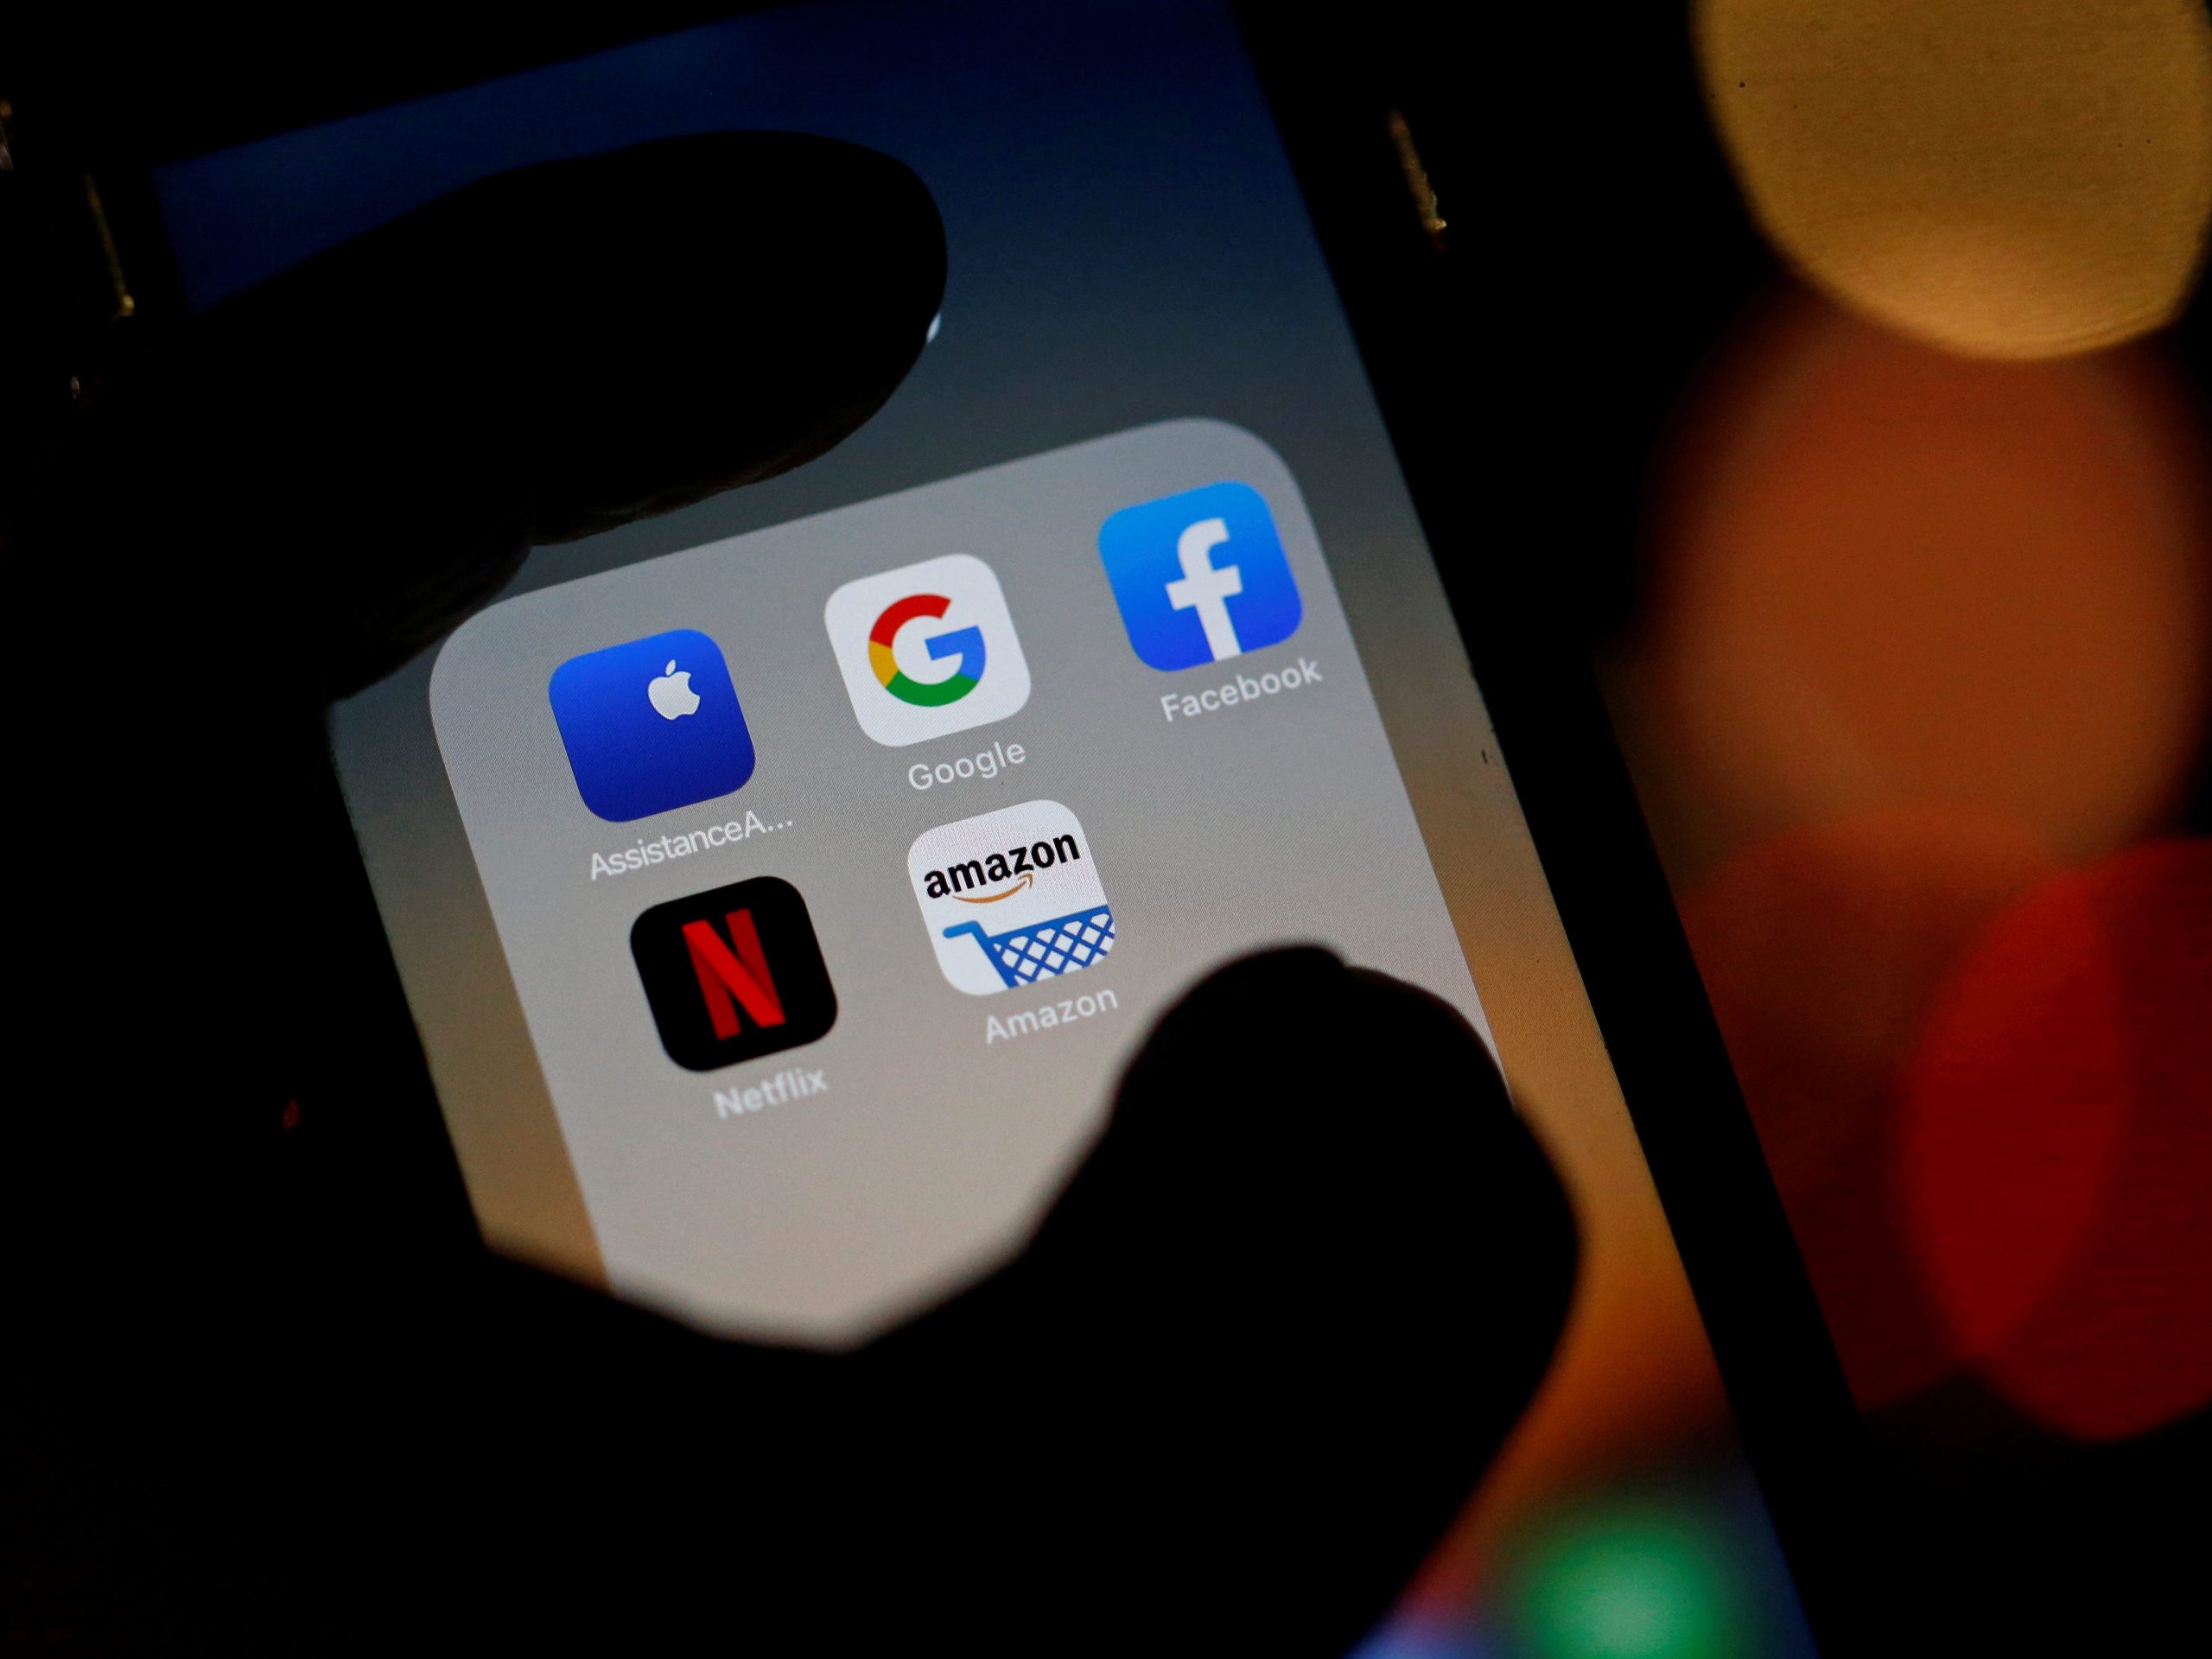 FILE PHOTO: The logos of mobile apps, Google, Amazon, Facebook, Apple and Netflix, are displayed on a screen in this illustration picture taken December 3, 2019. REUTERS/Regis Duvignau